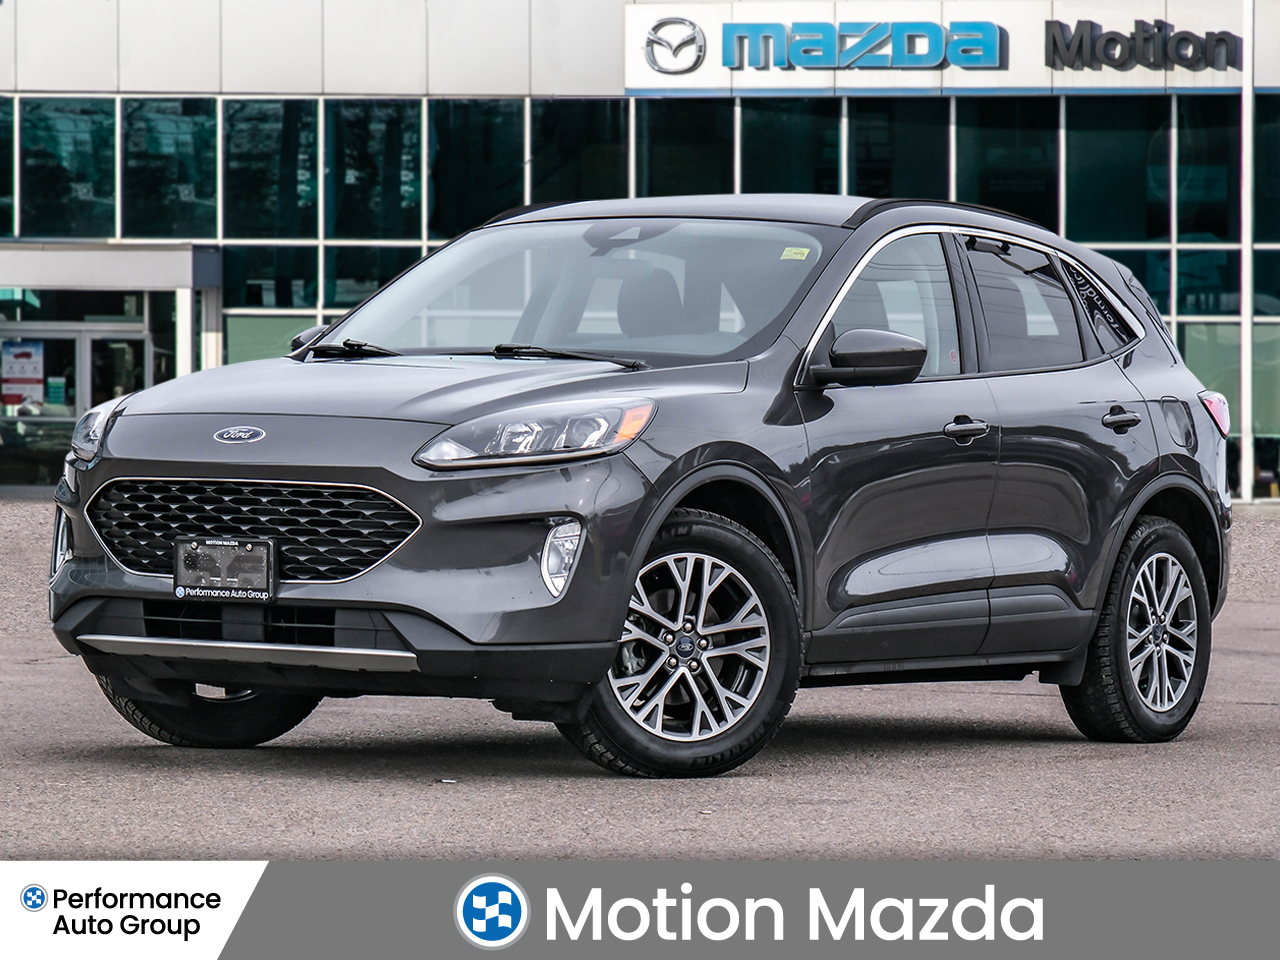 2020 Ford Escape SEL AWD*JUST ARRIVED*CLEAN CARFAX!